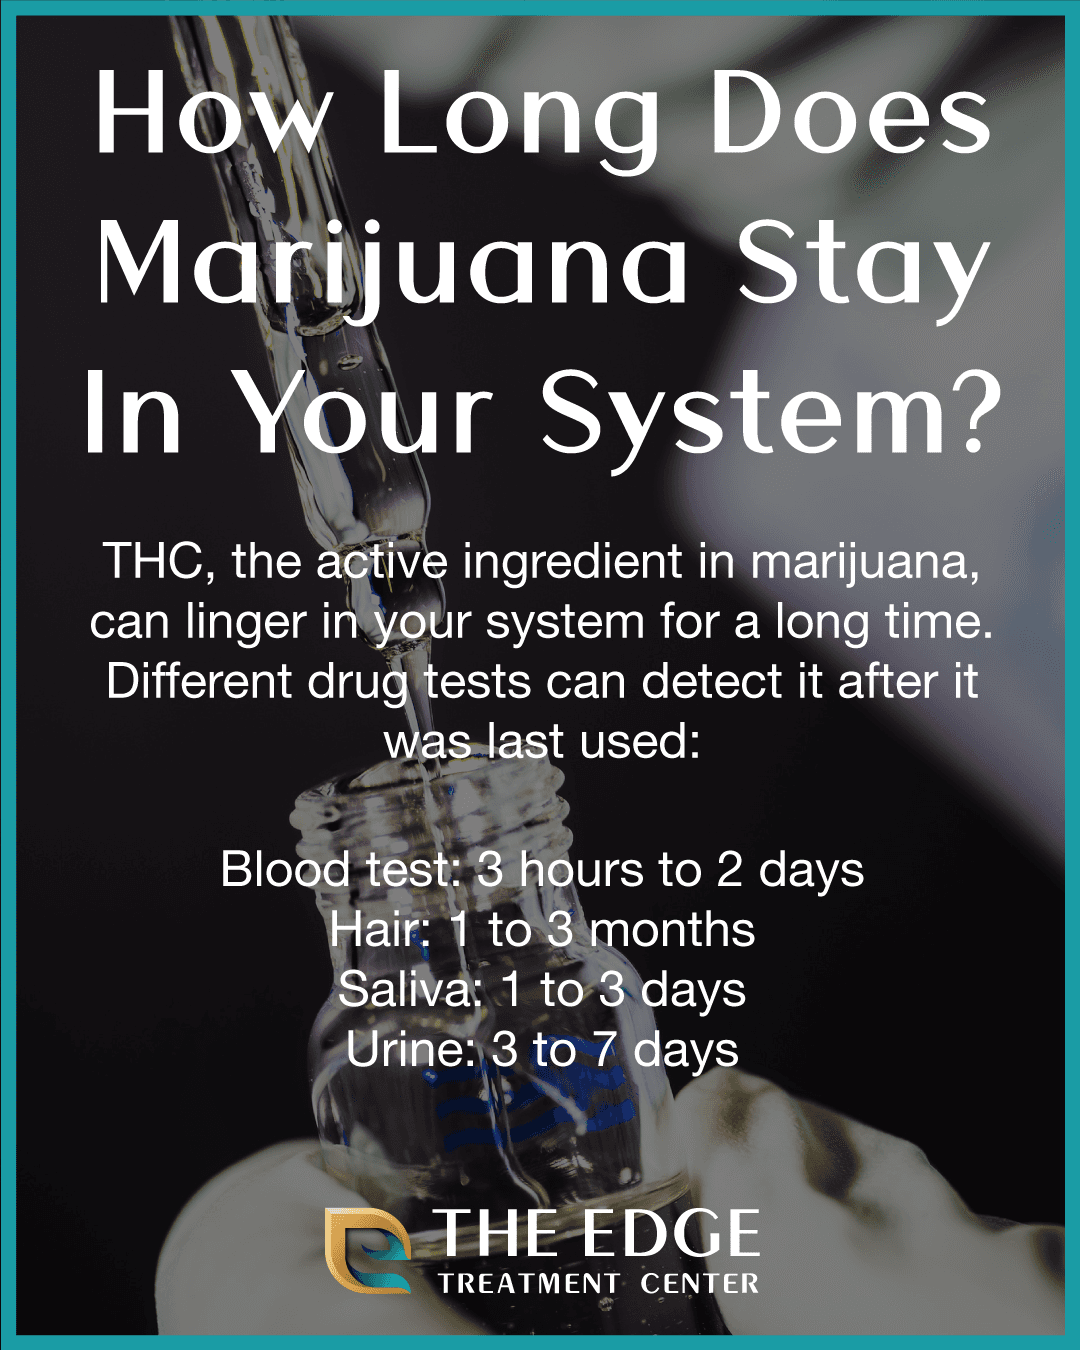 How Long Does Marijuana Stay in Your System?